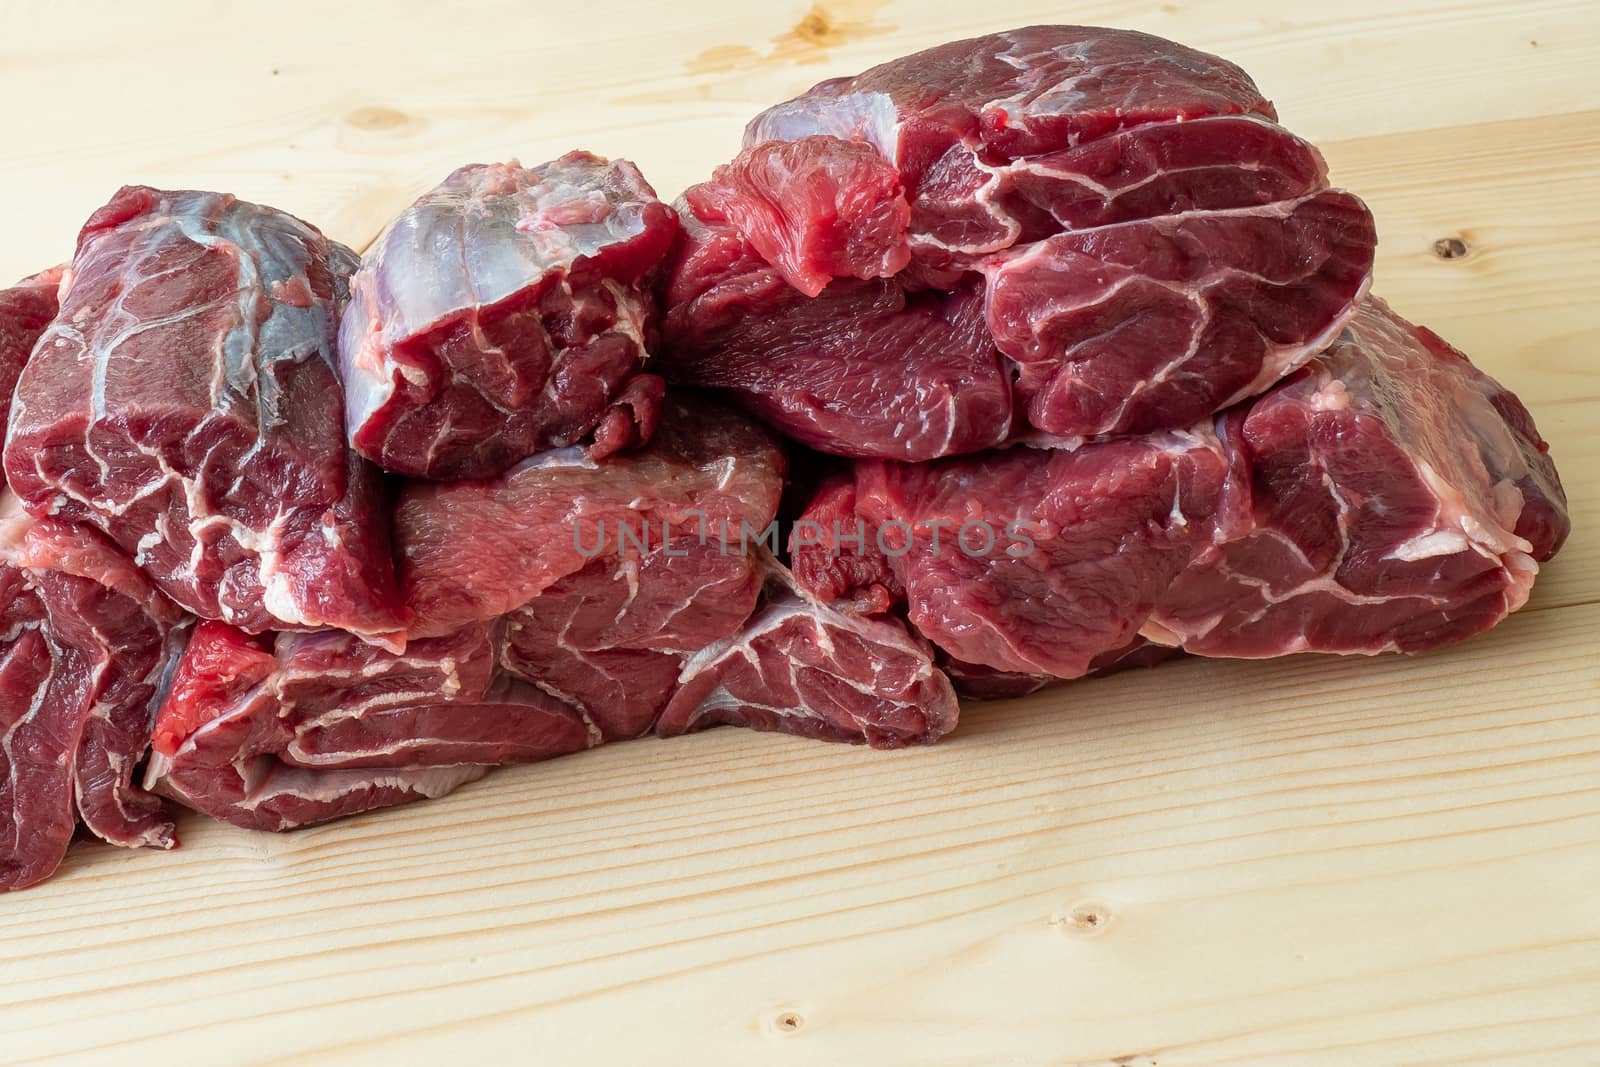 Raw breef meat on wooden table